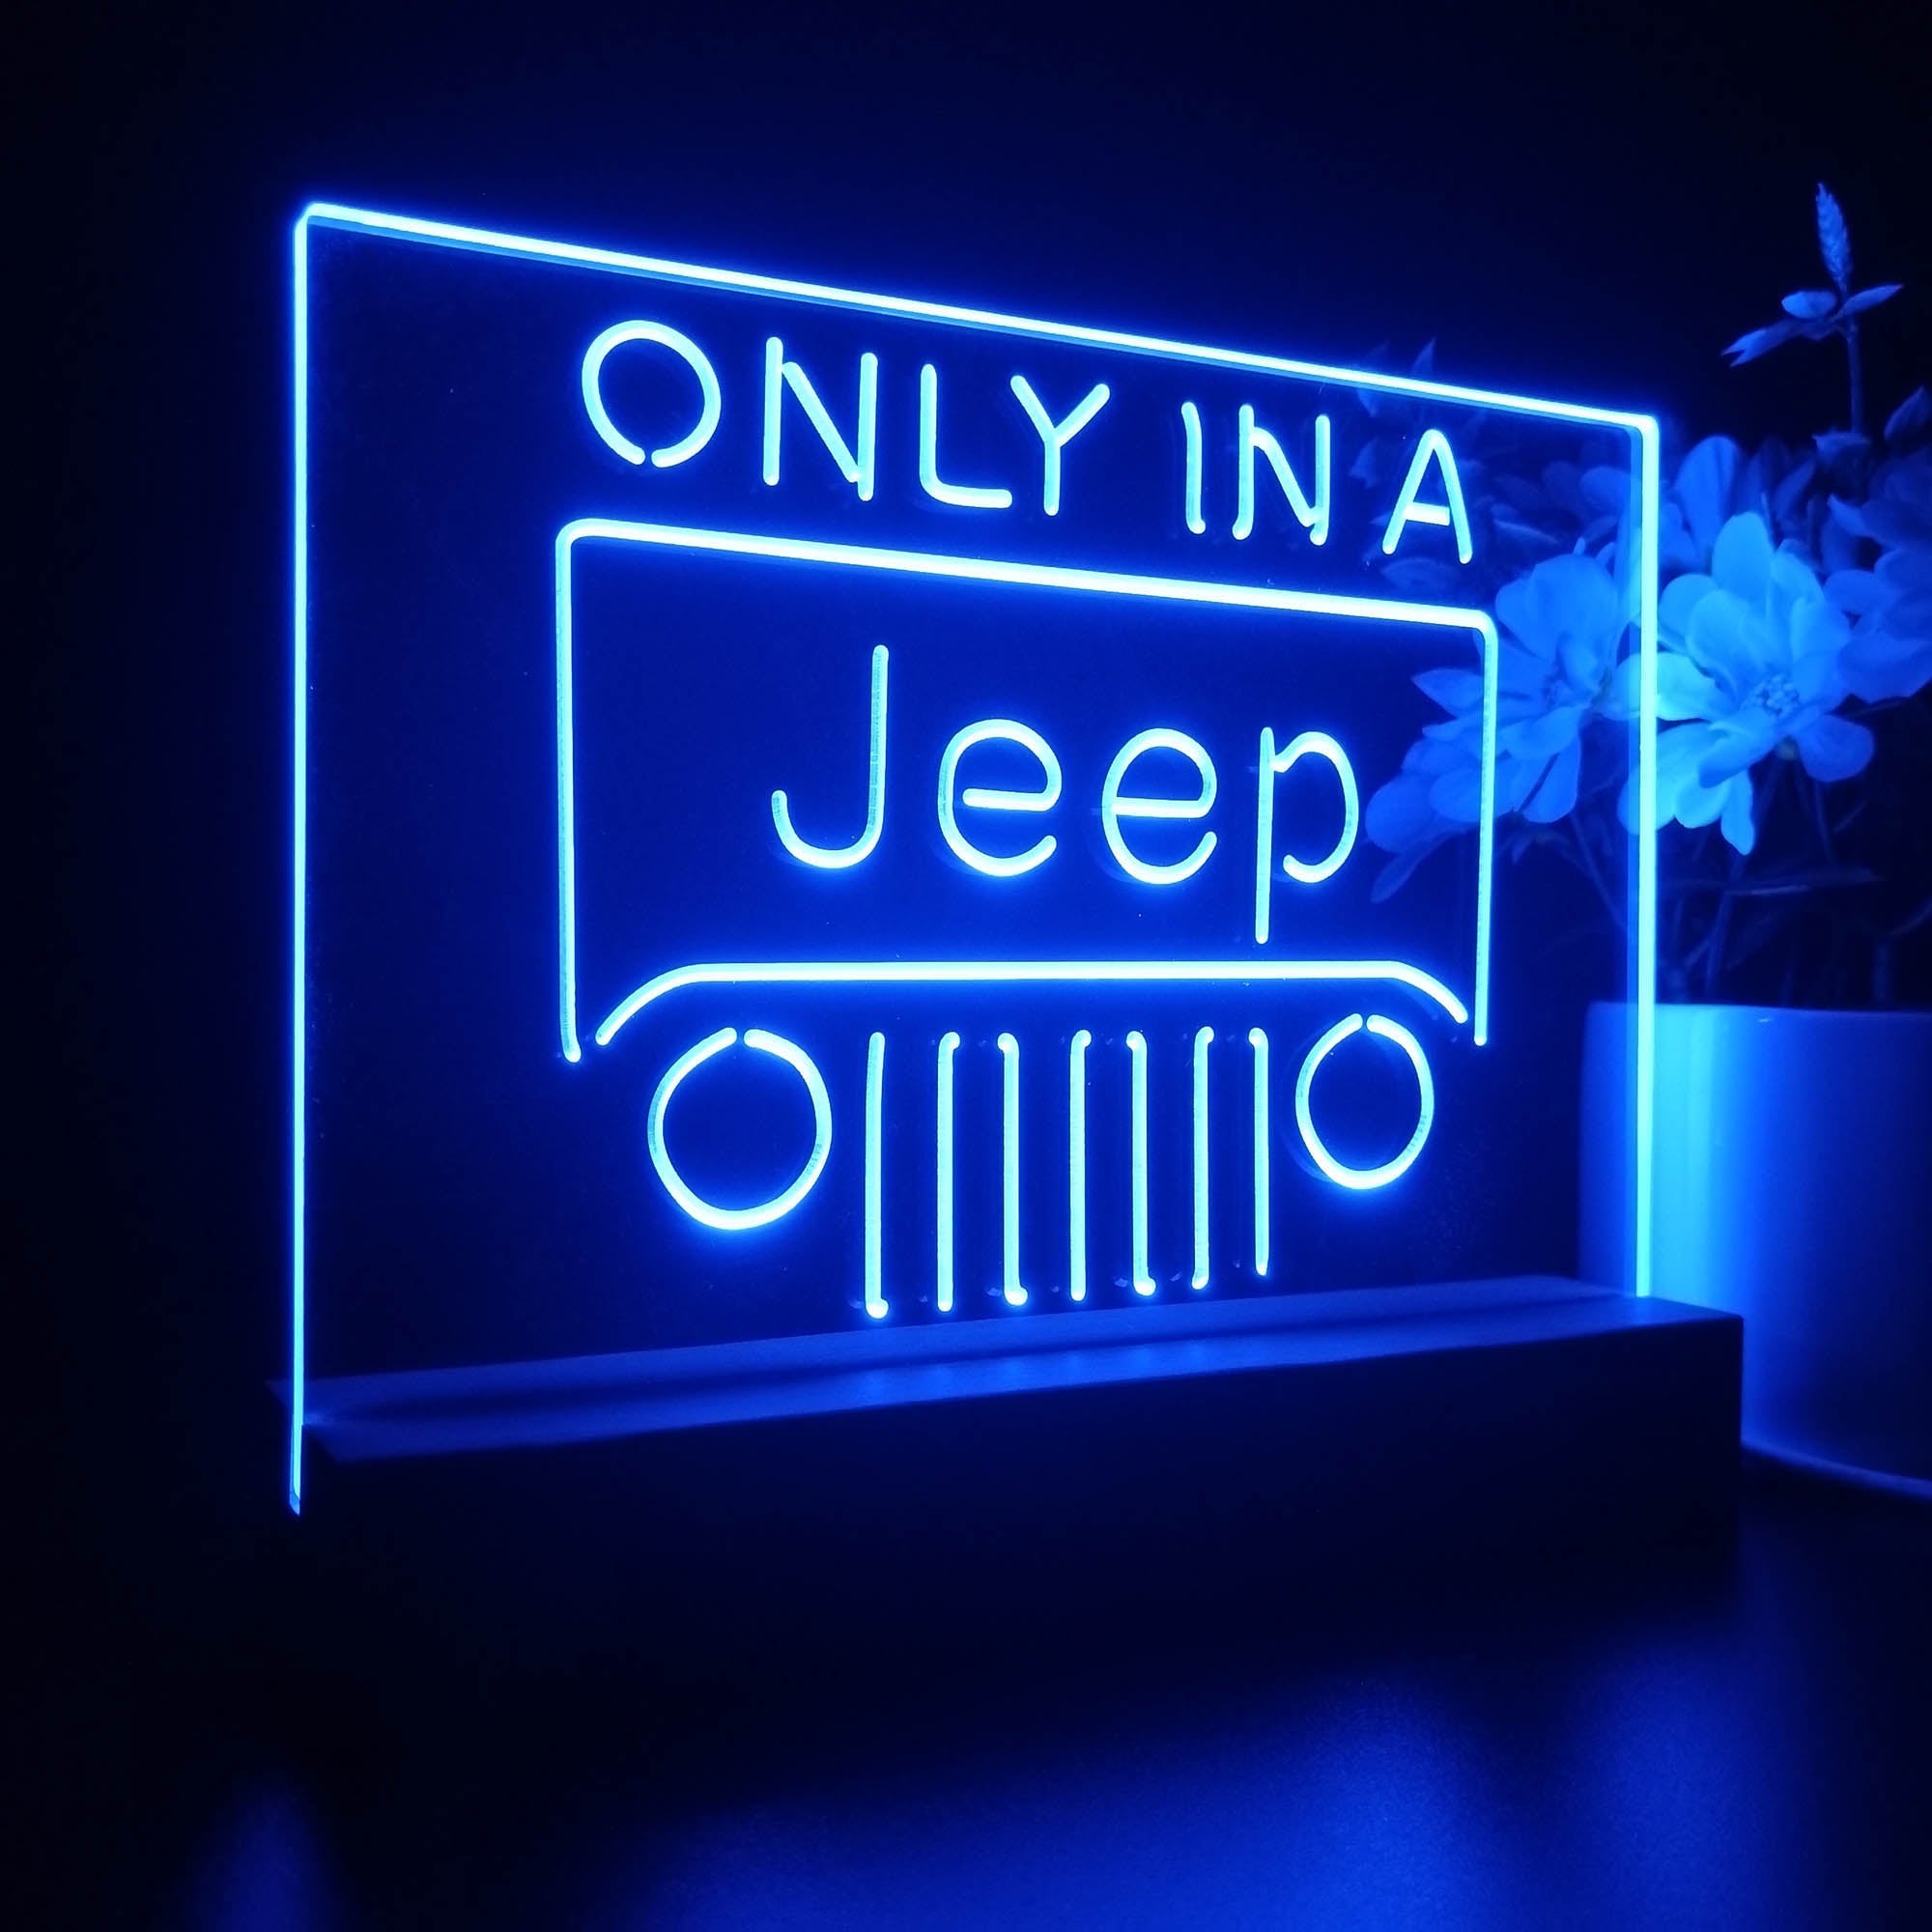 Only in a Jeep Beer Garage 3D LED Illusion Night Light